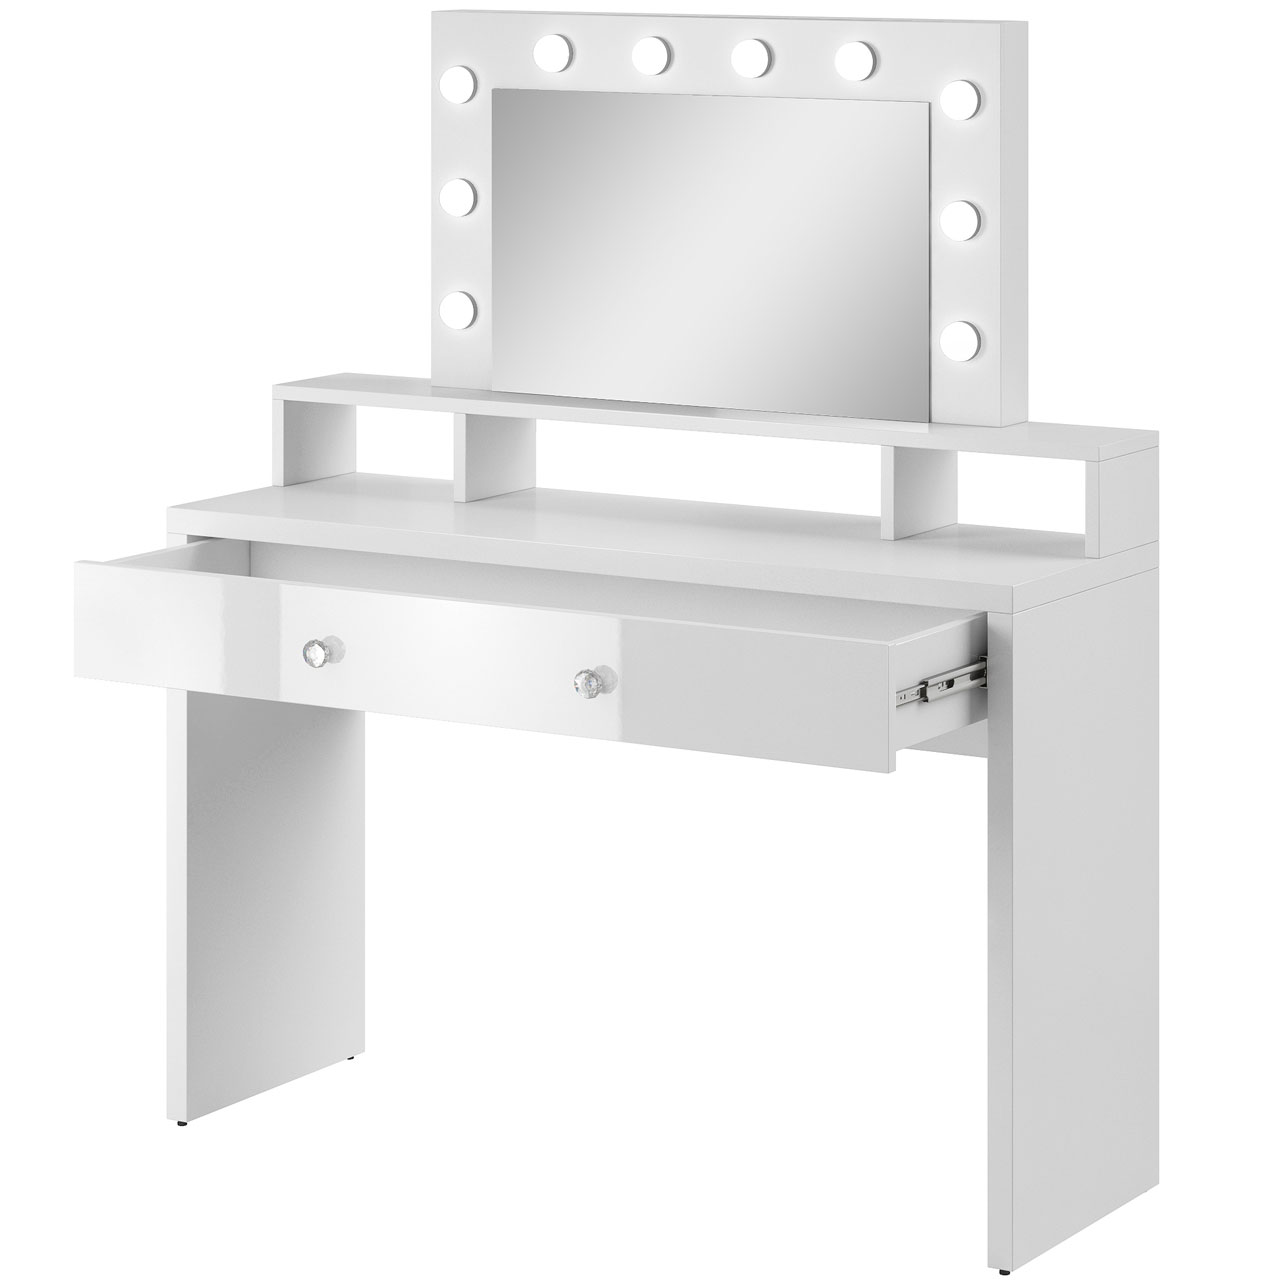 Dressing table with mirror and lighting ARIA white / white gloss